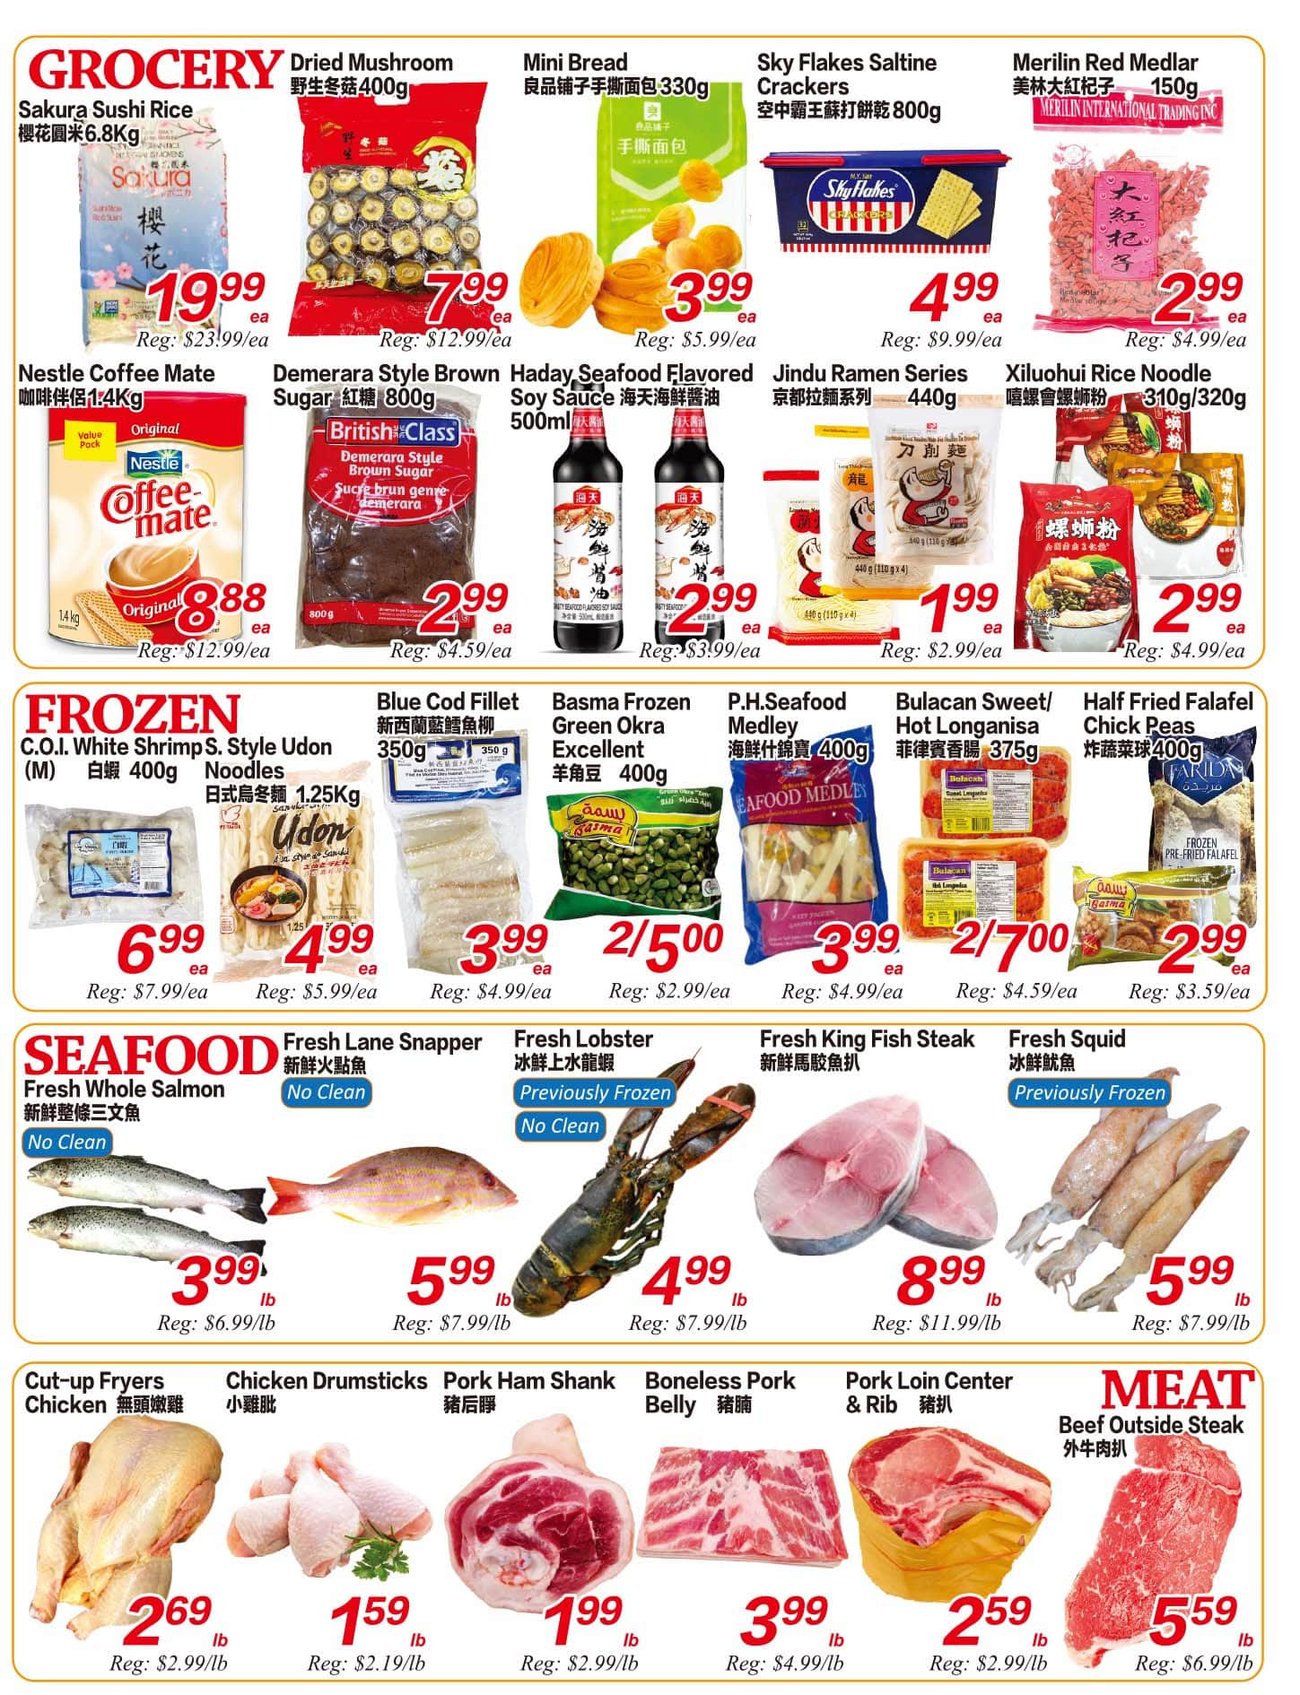 Superking Supermarket - London - Weekly Flyer Specials - Page 3